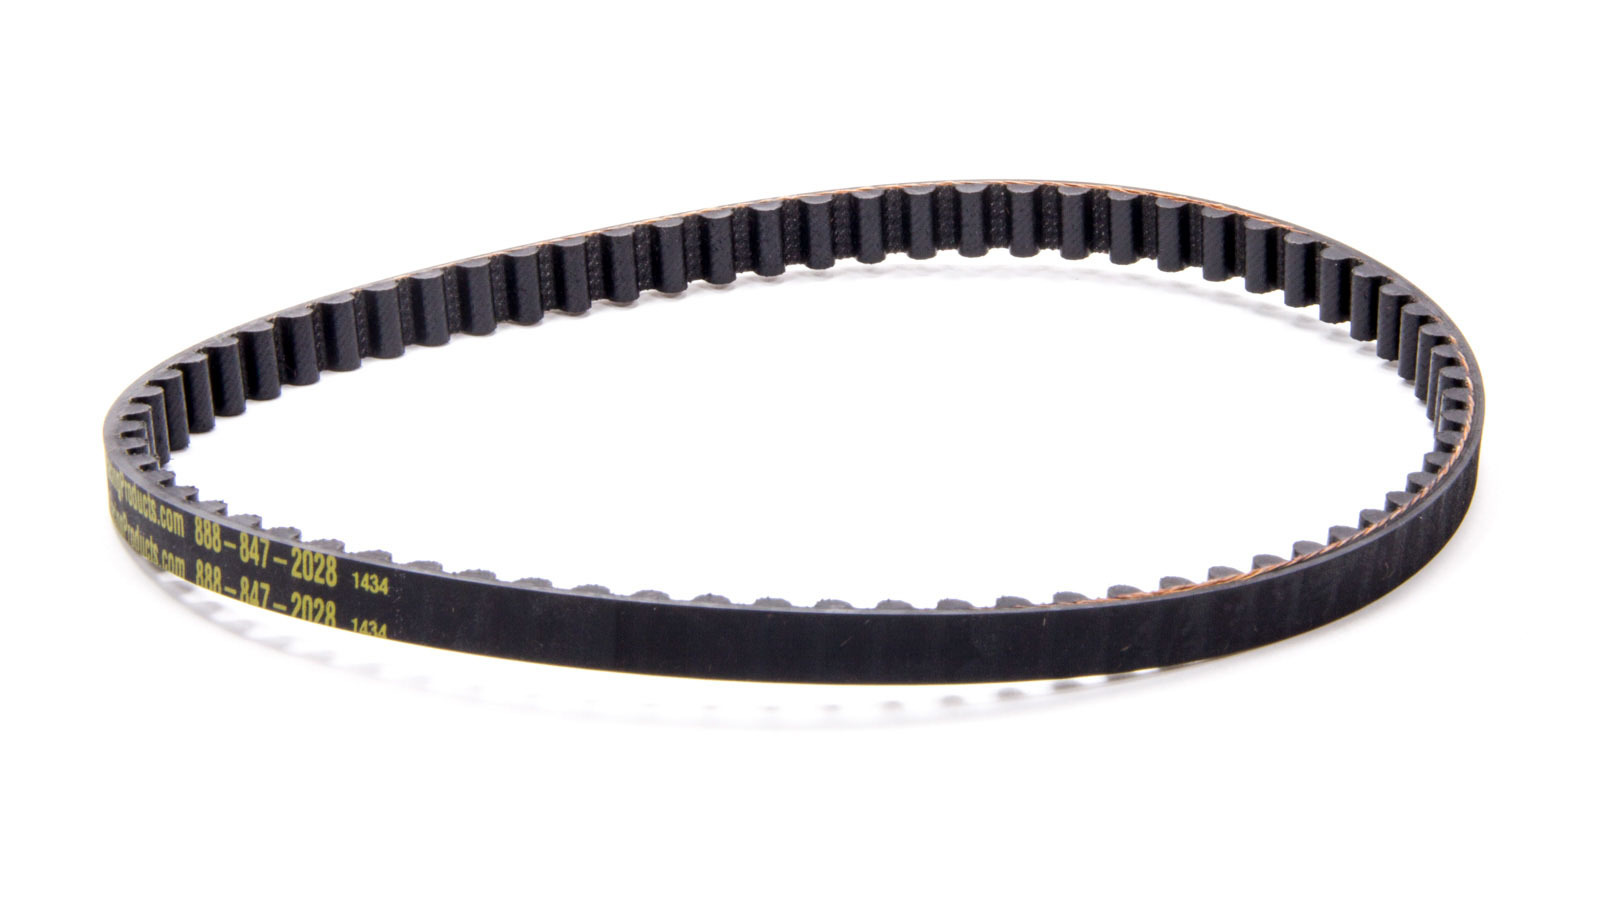 Jones Racing Products 656-10HD HTD Drive Belt, 25.830 in Long, 10 mm Wide, 8 mm Pitch, Each